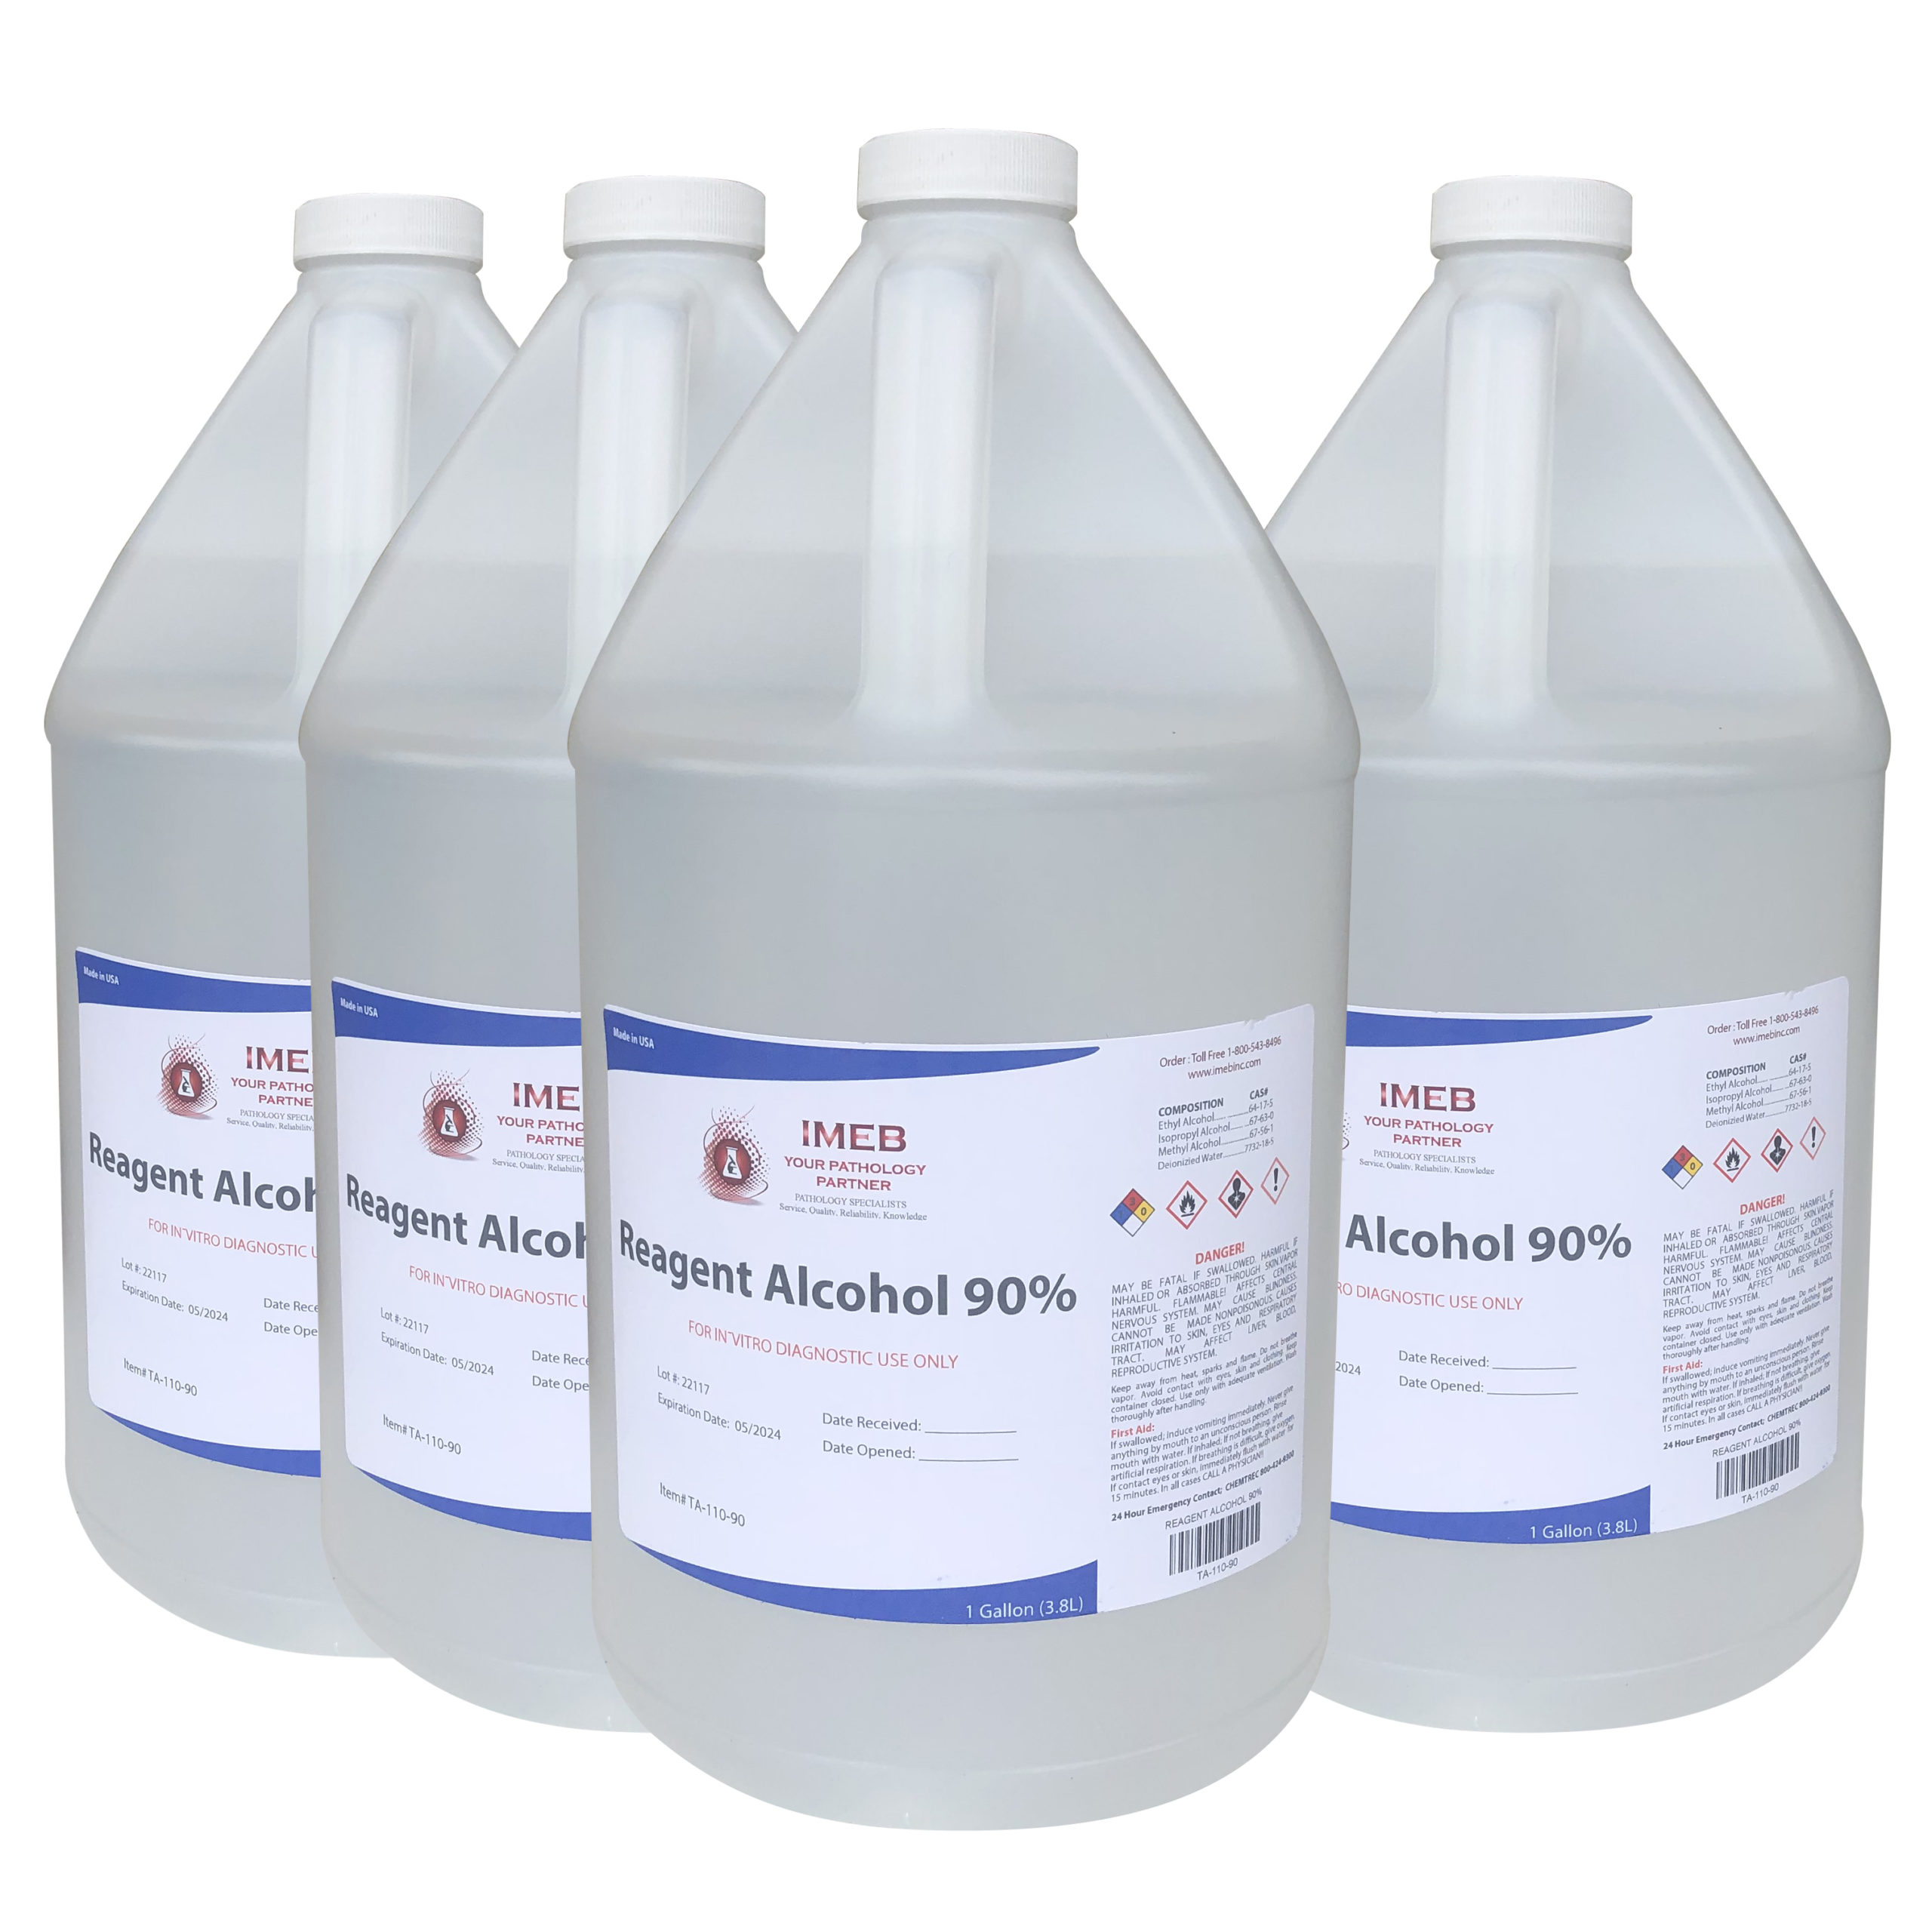 Picture of a 4-pack (4 gallons) of Tek-Select Reagent Alcohol 90 percent